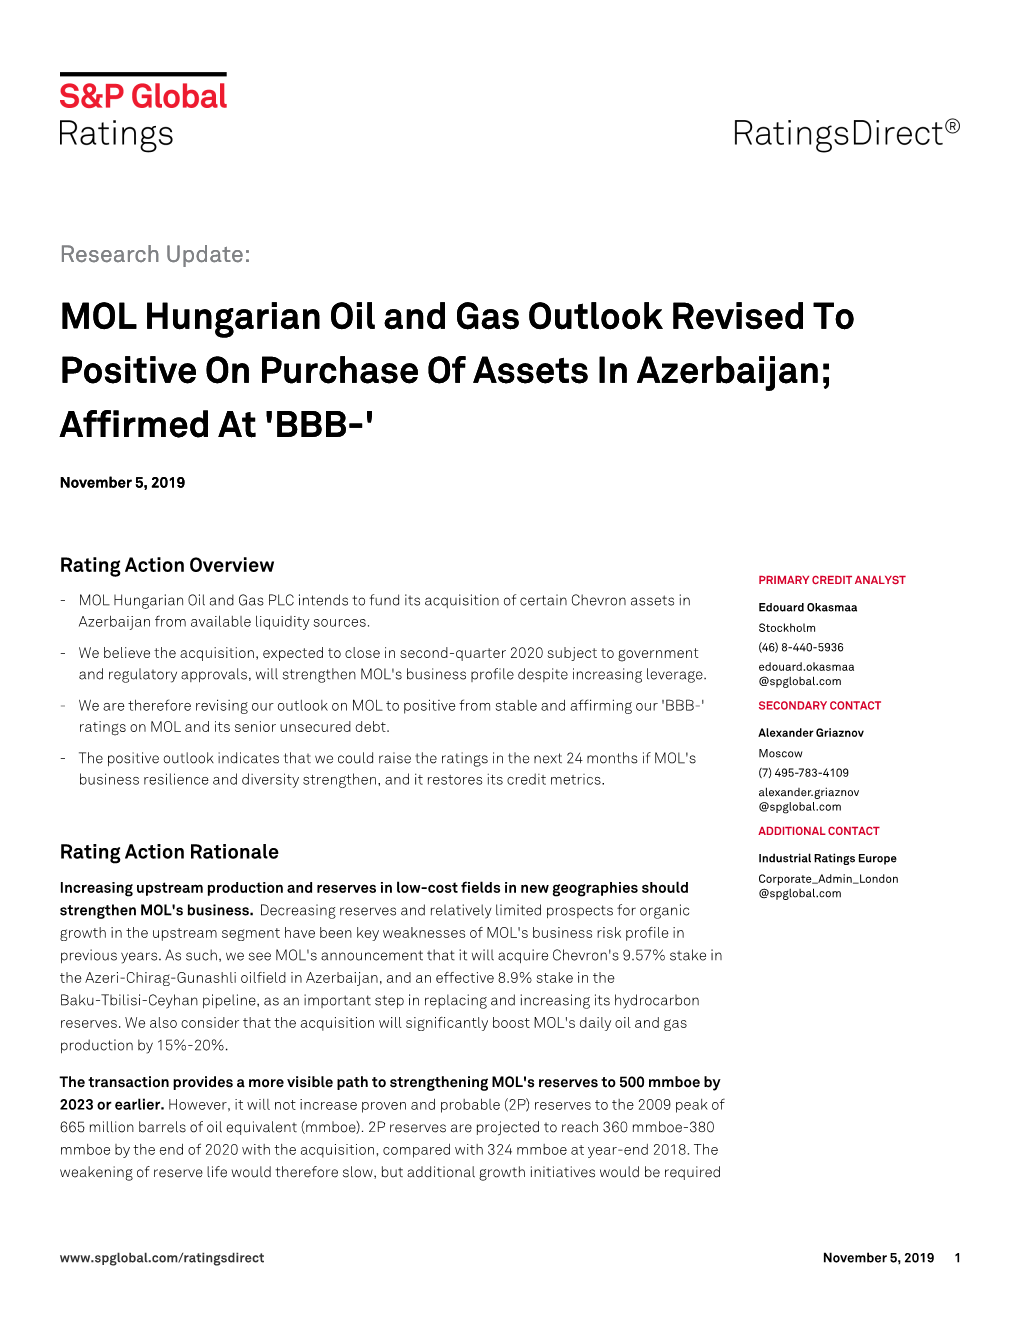 MOL Hungarian Oil and Gas Outlook Revised to Positive on Purchase of Assets in Azerbaijan; Affirmed at 'BBB-'